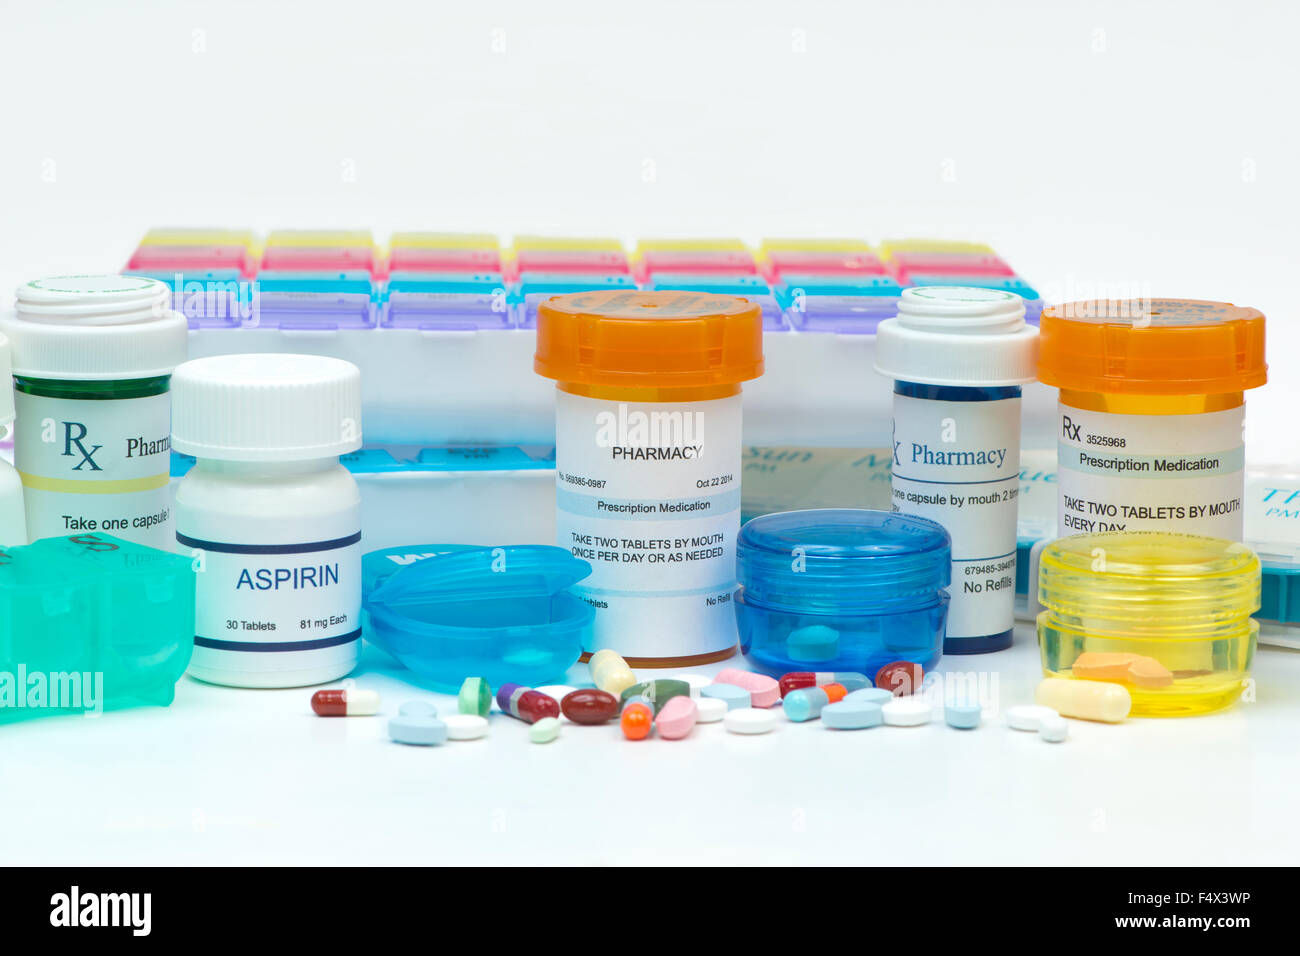 Prescription medications, pills, and daily medication organizer boxes. Labels created by photographer. Stock Photo